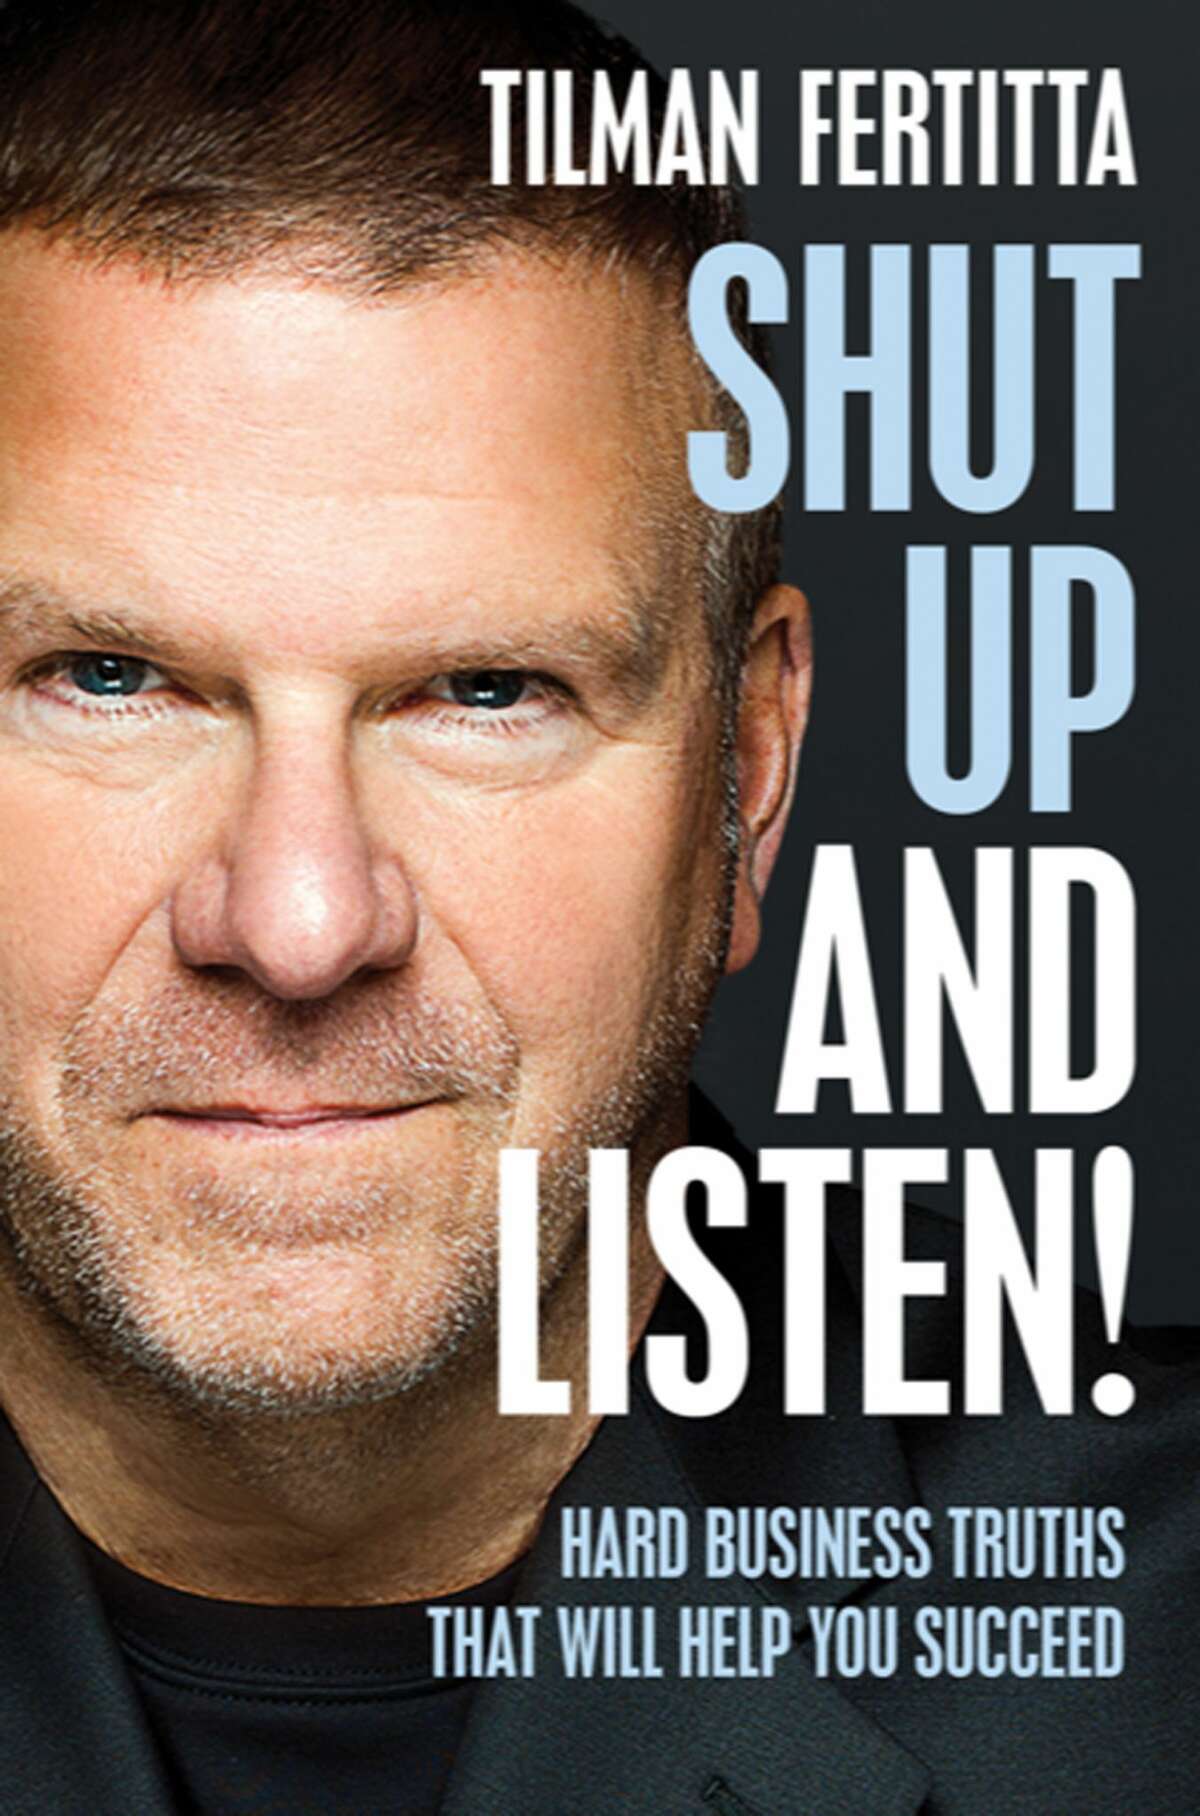 Fertitta shares his secrets to achieving success inside the pages of "Shut Up and Listen!"